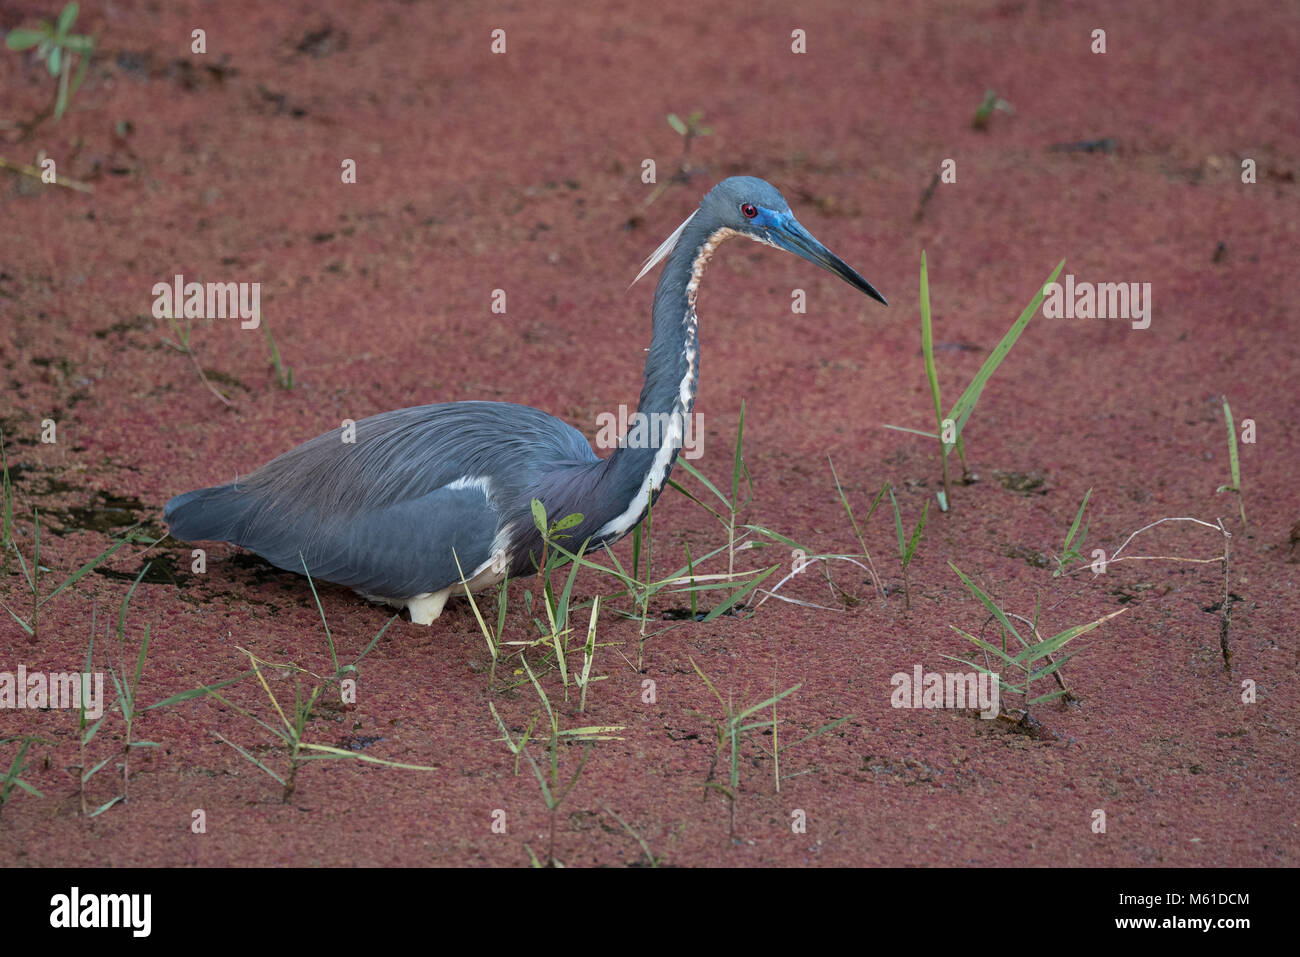 Tricolor Heron wading in the red agae looking for a mate. Stock Photo